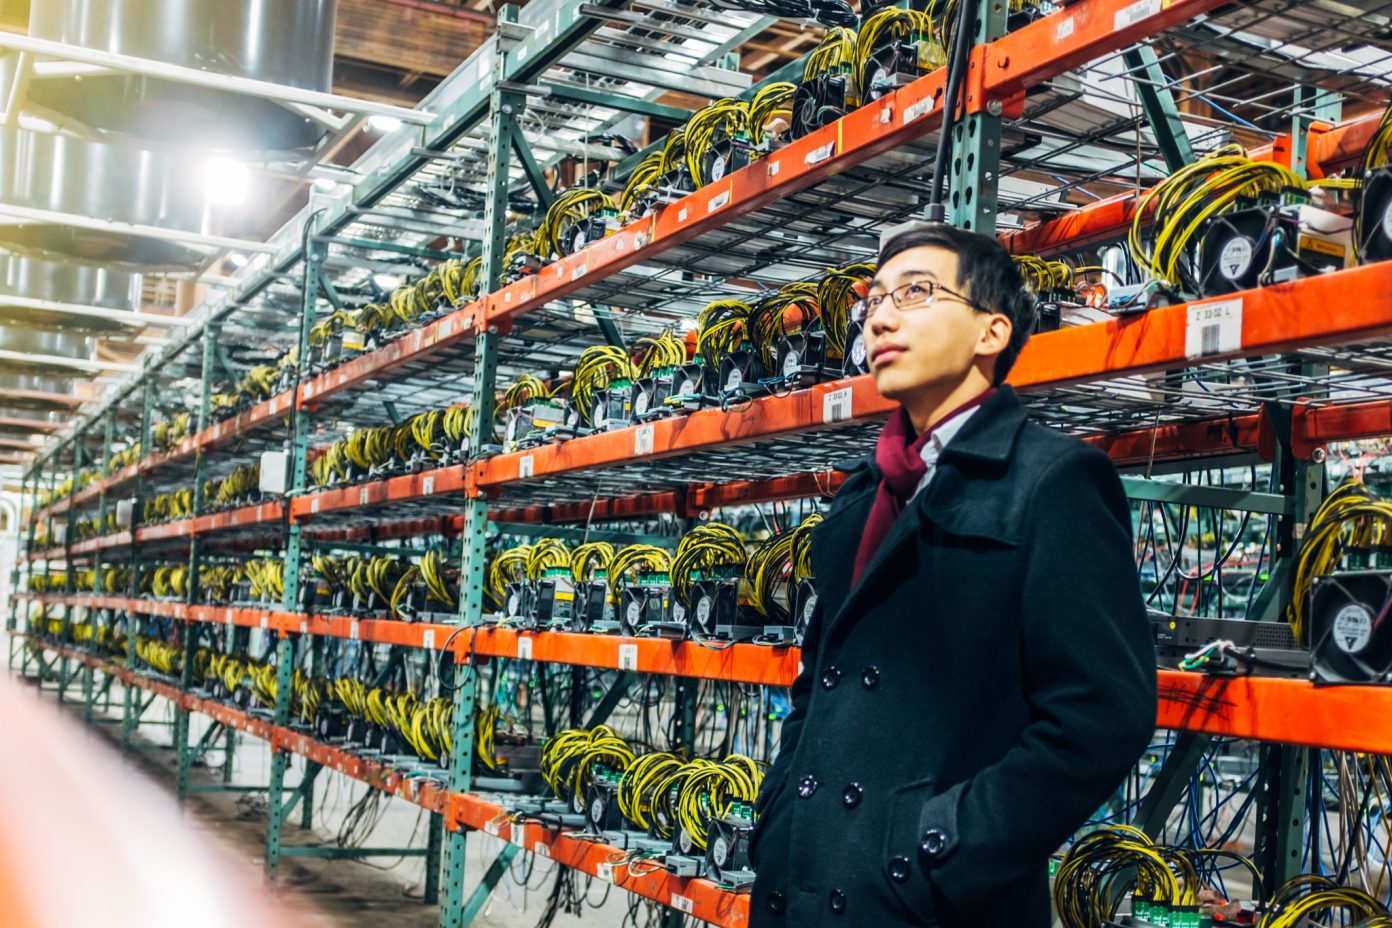 One Chinese province accounts for more than a third of Bitcoin’s hashrate.